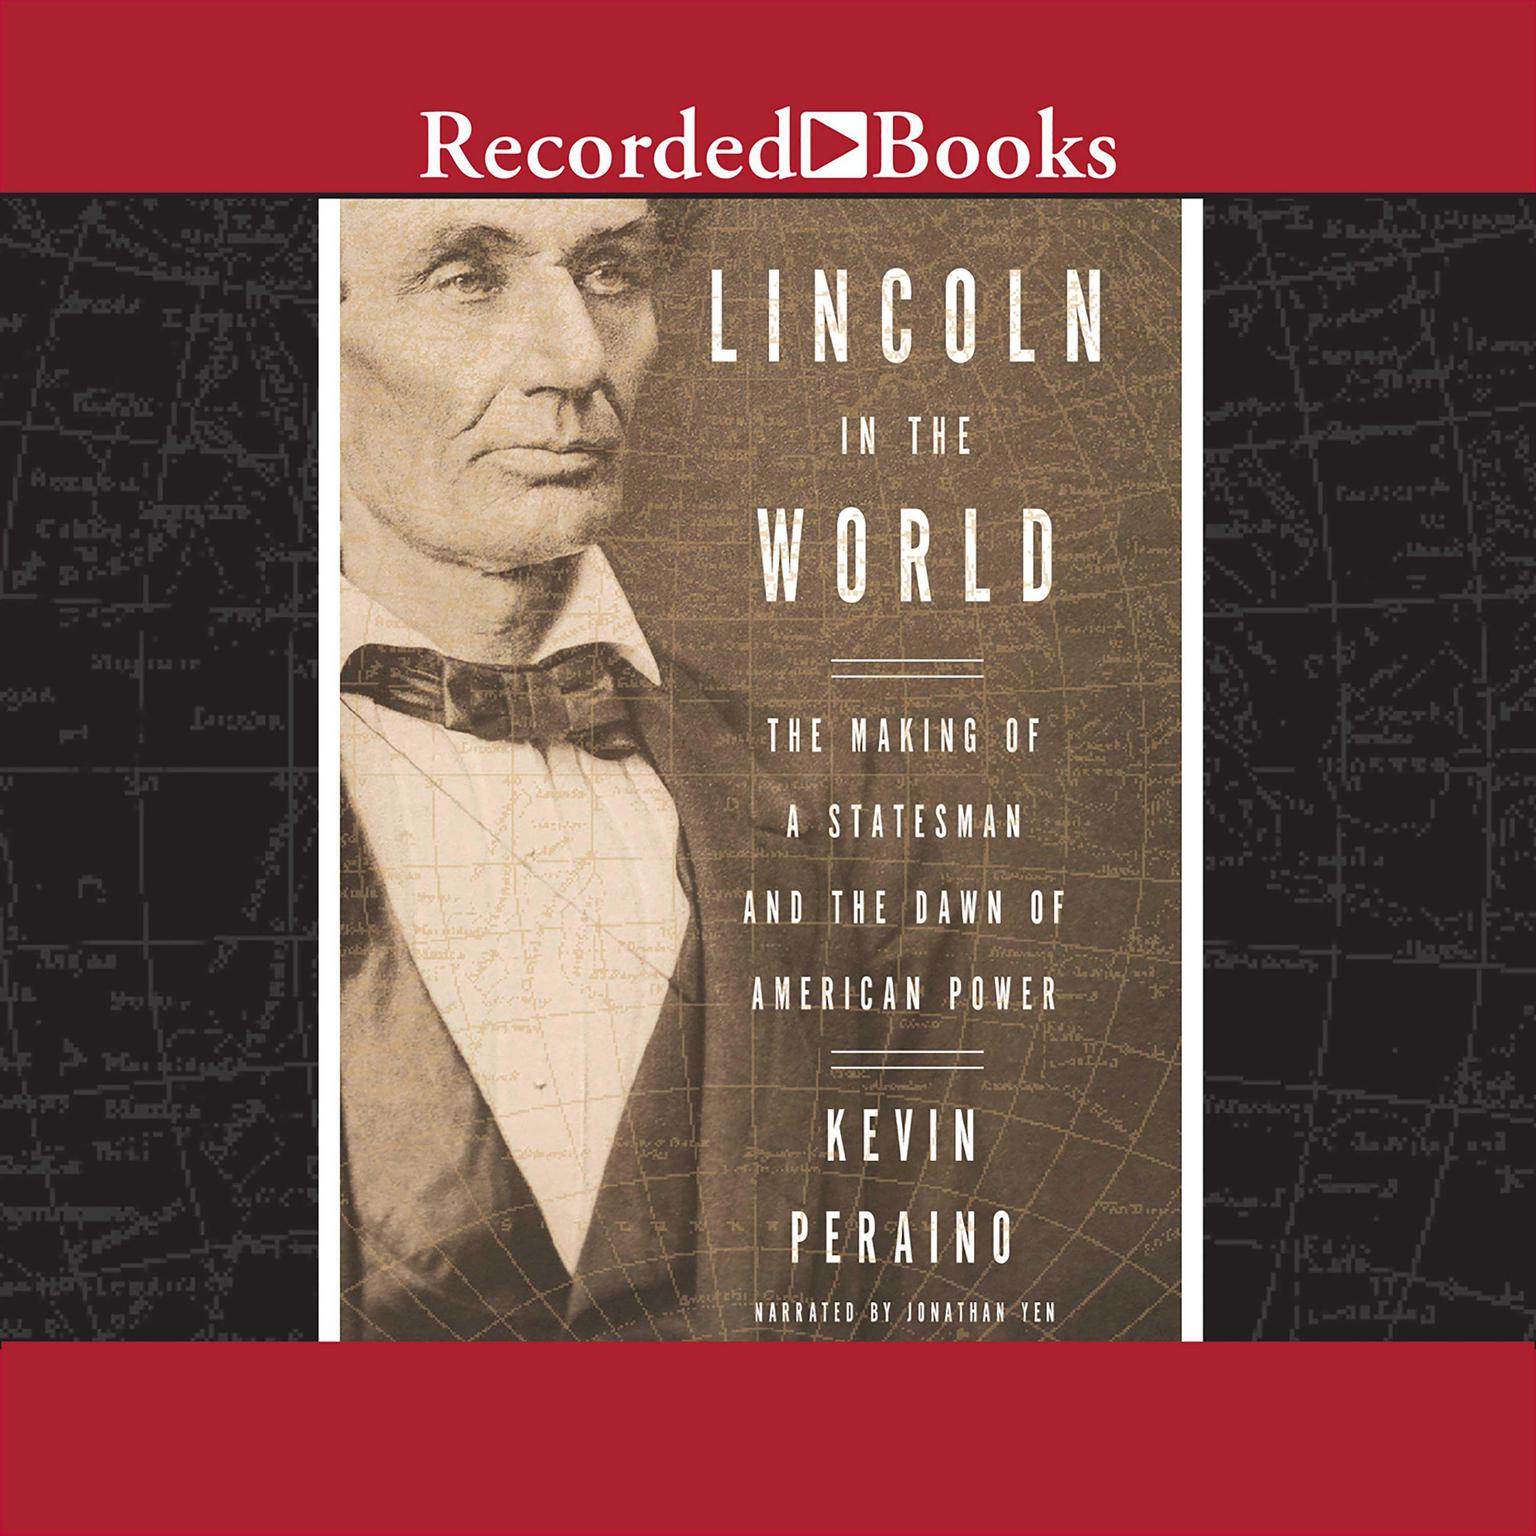 Lincoln in the World: The Making of A Statesman and the Dawn of American Power Audiobook, by Kevin Peraino